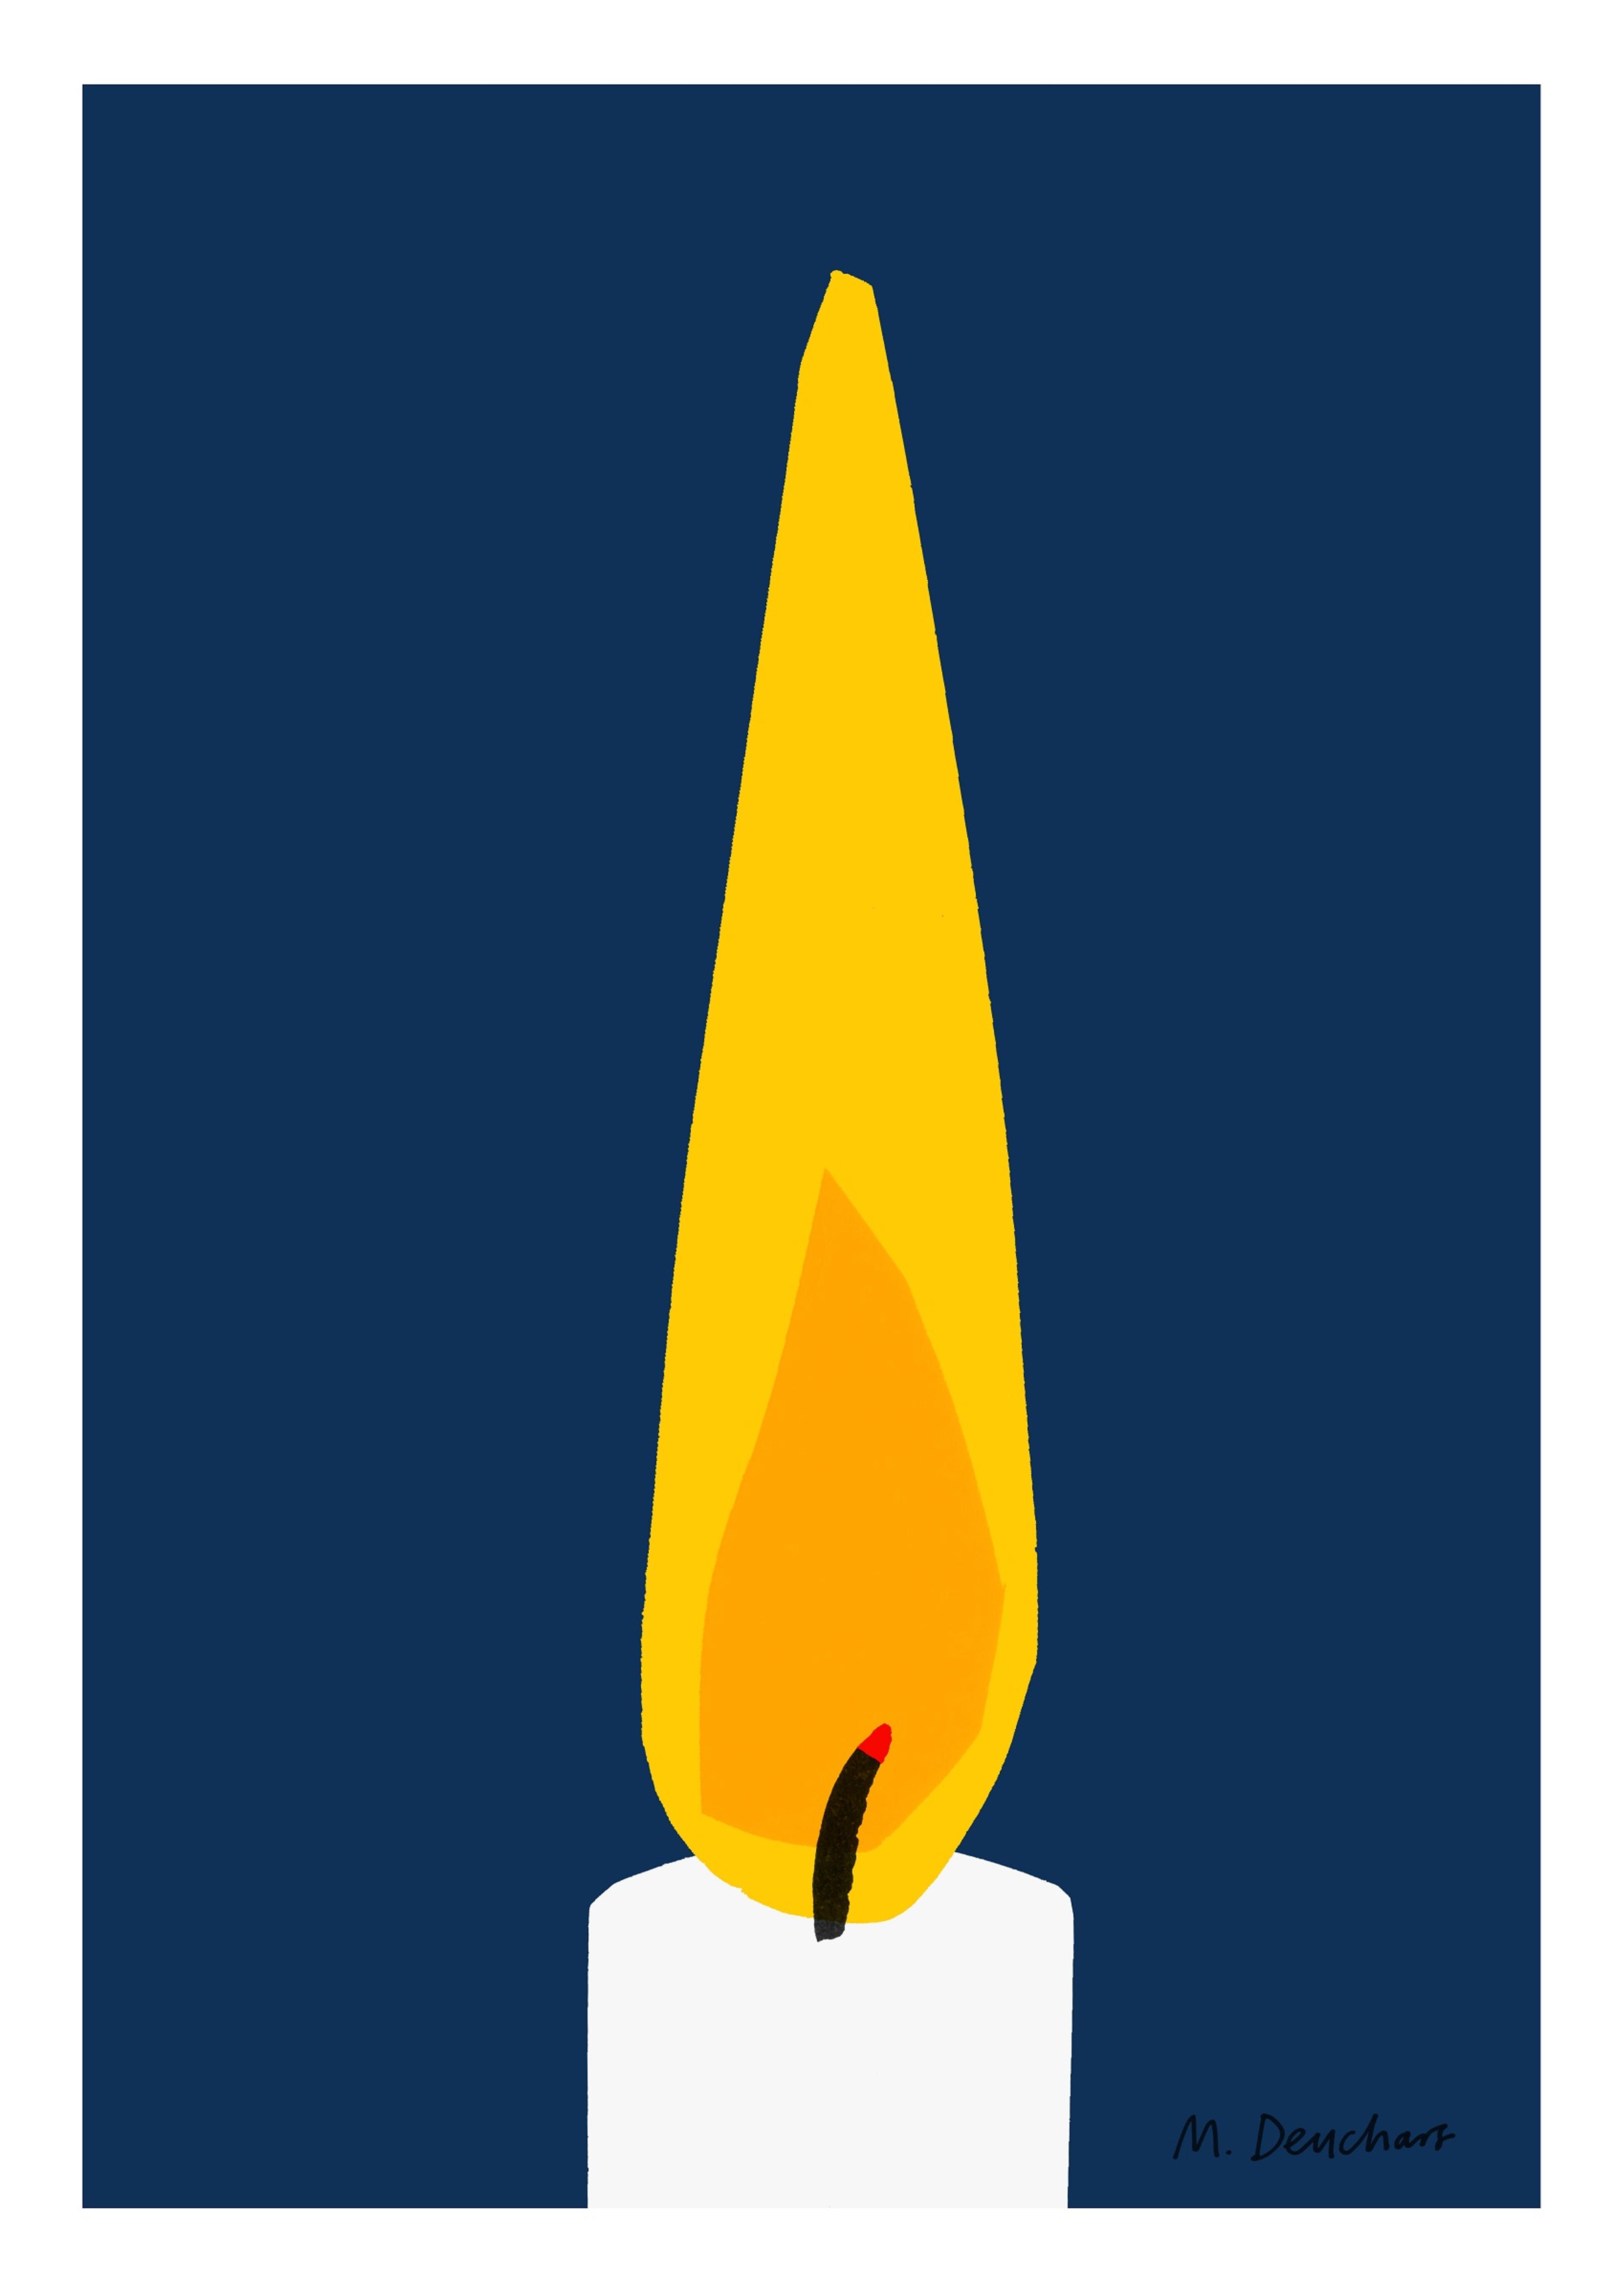 Illustration of a close up candle flame